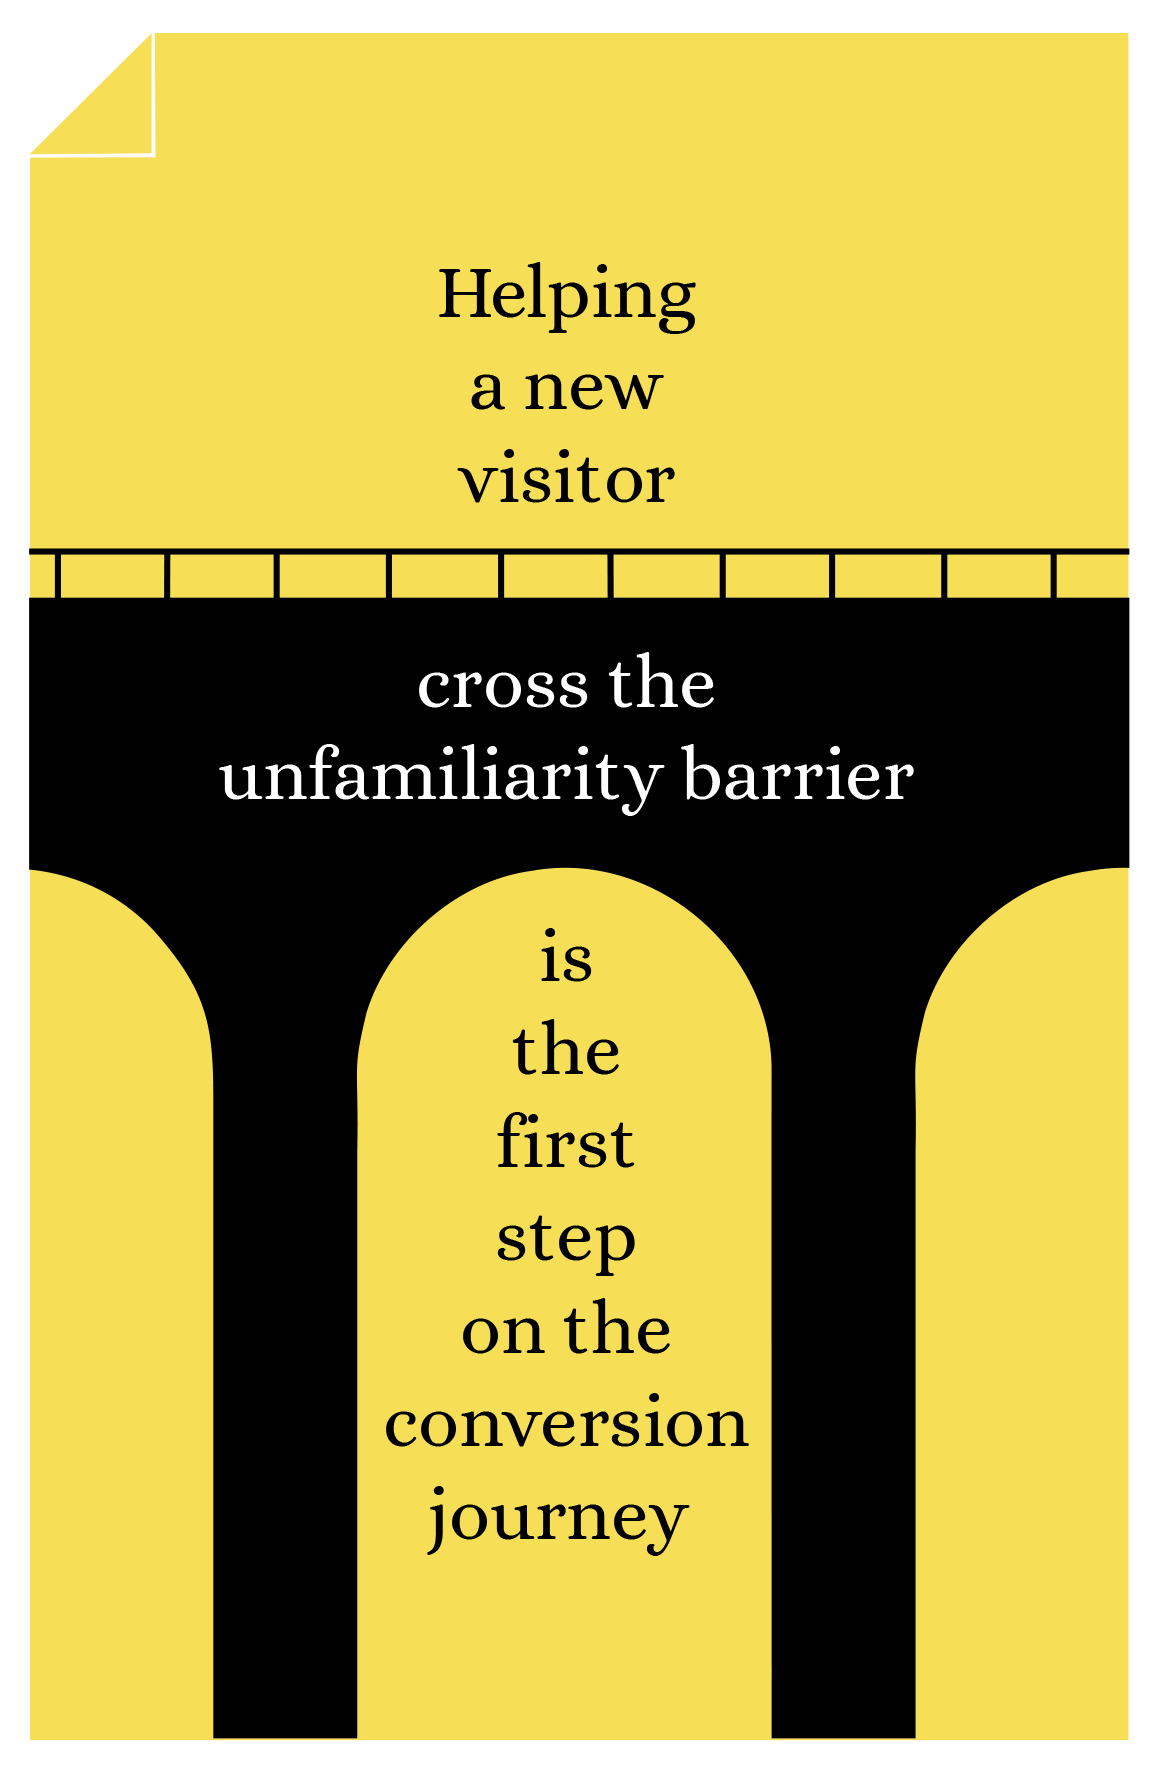 Optimize conversion rates. Get the user over the unfamiliarity barrier